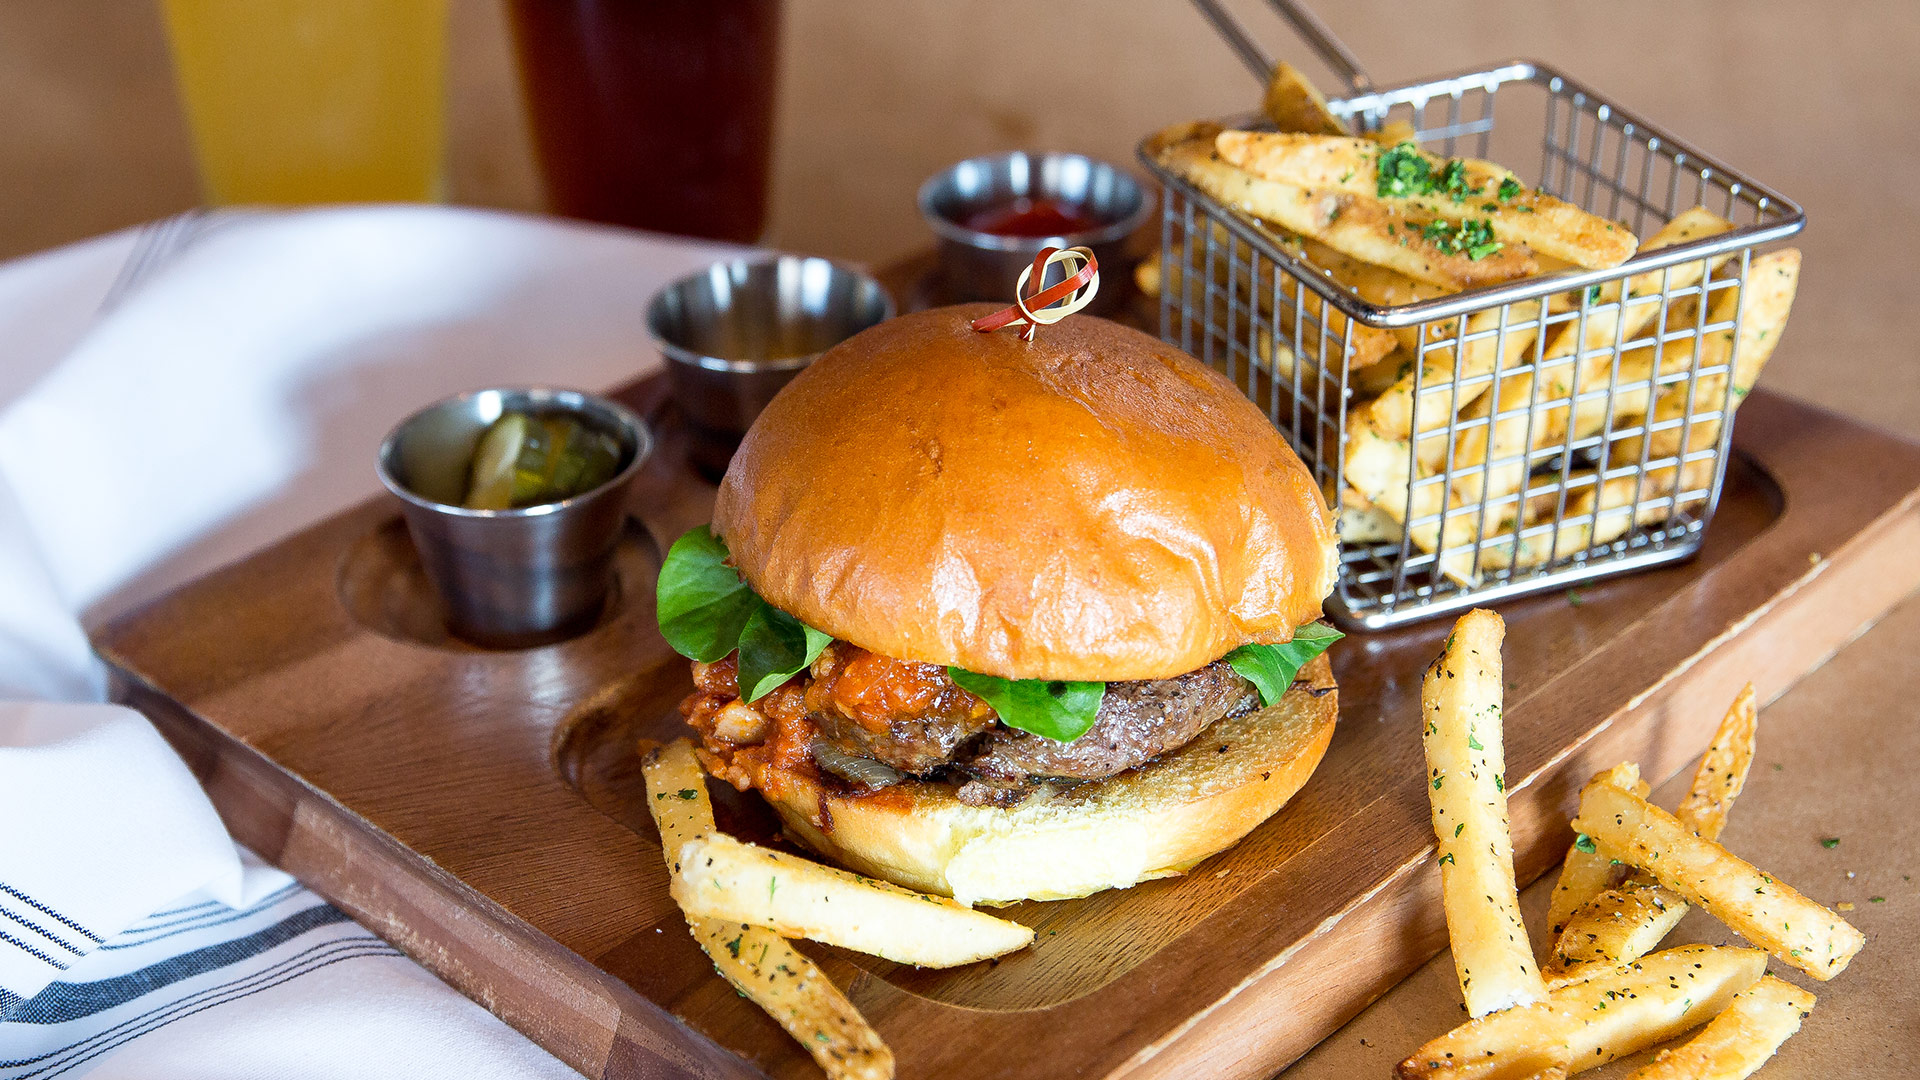 Burger and fries on wooden plate